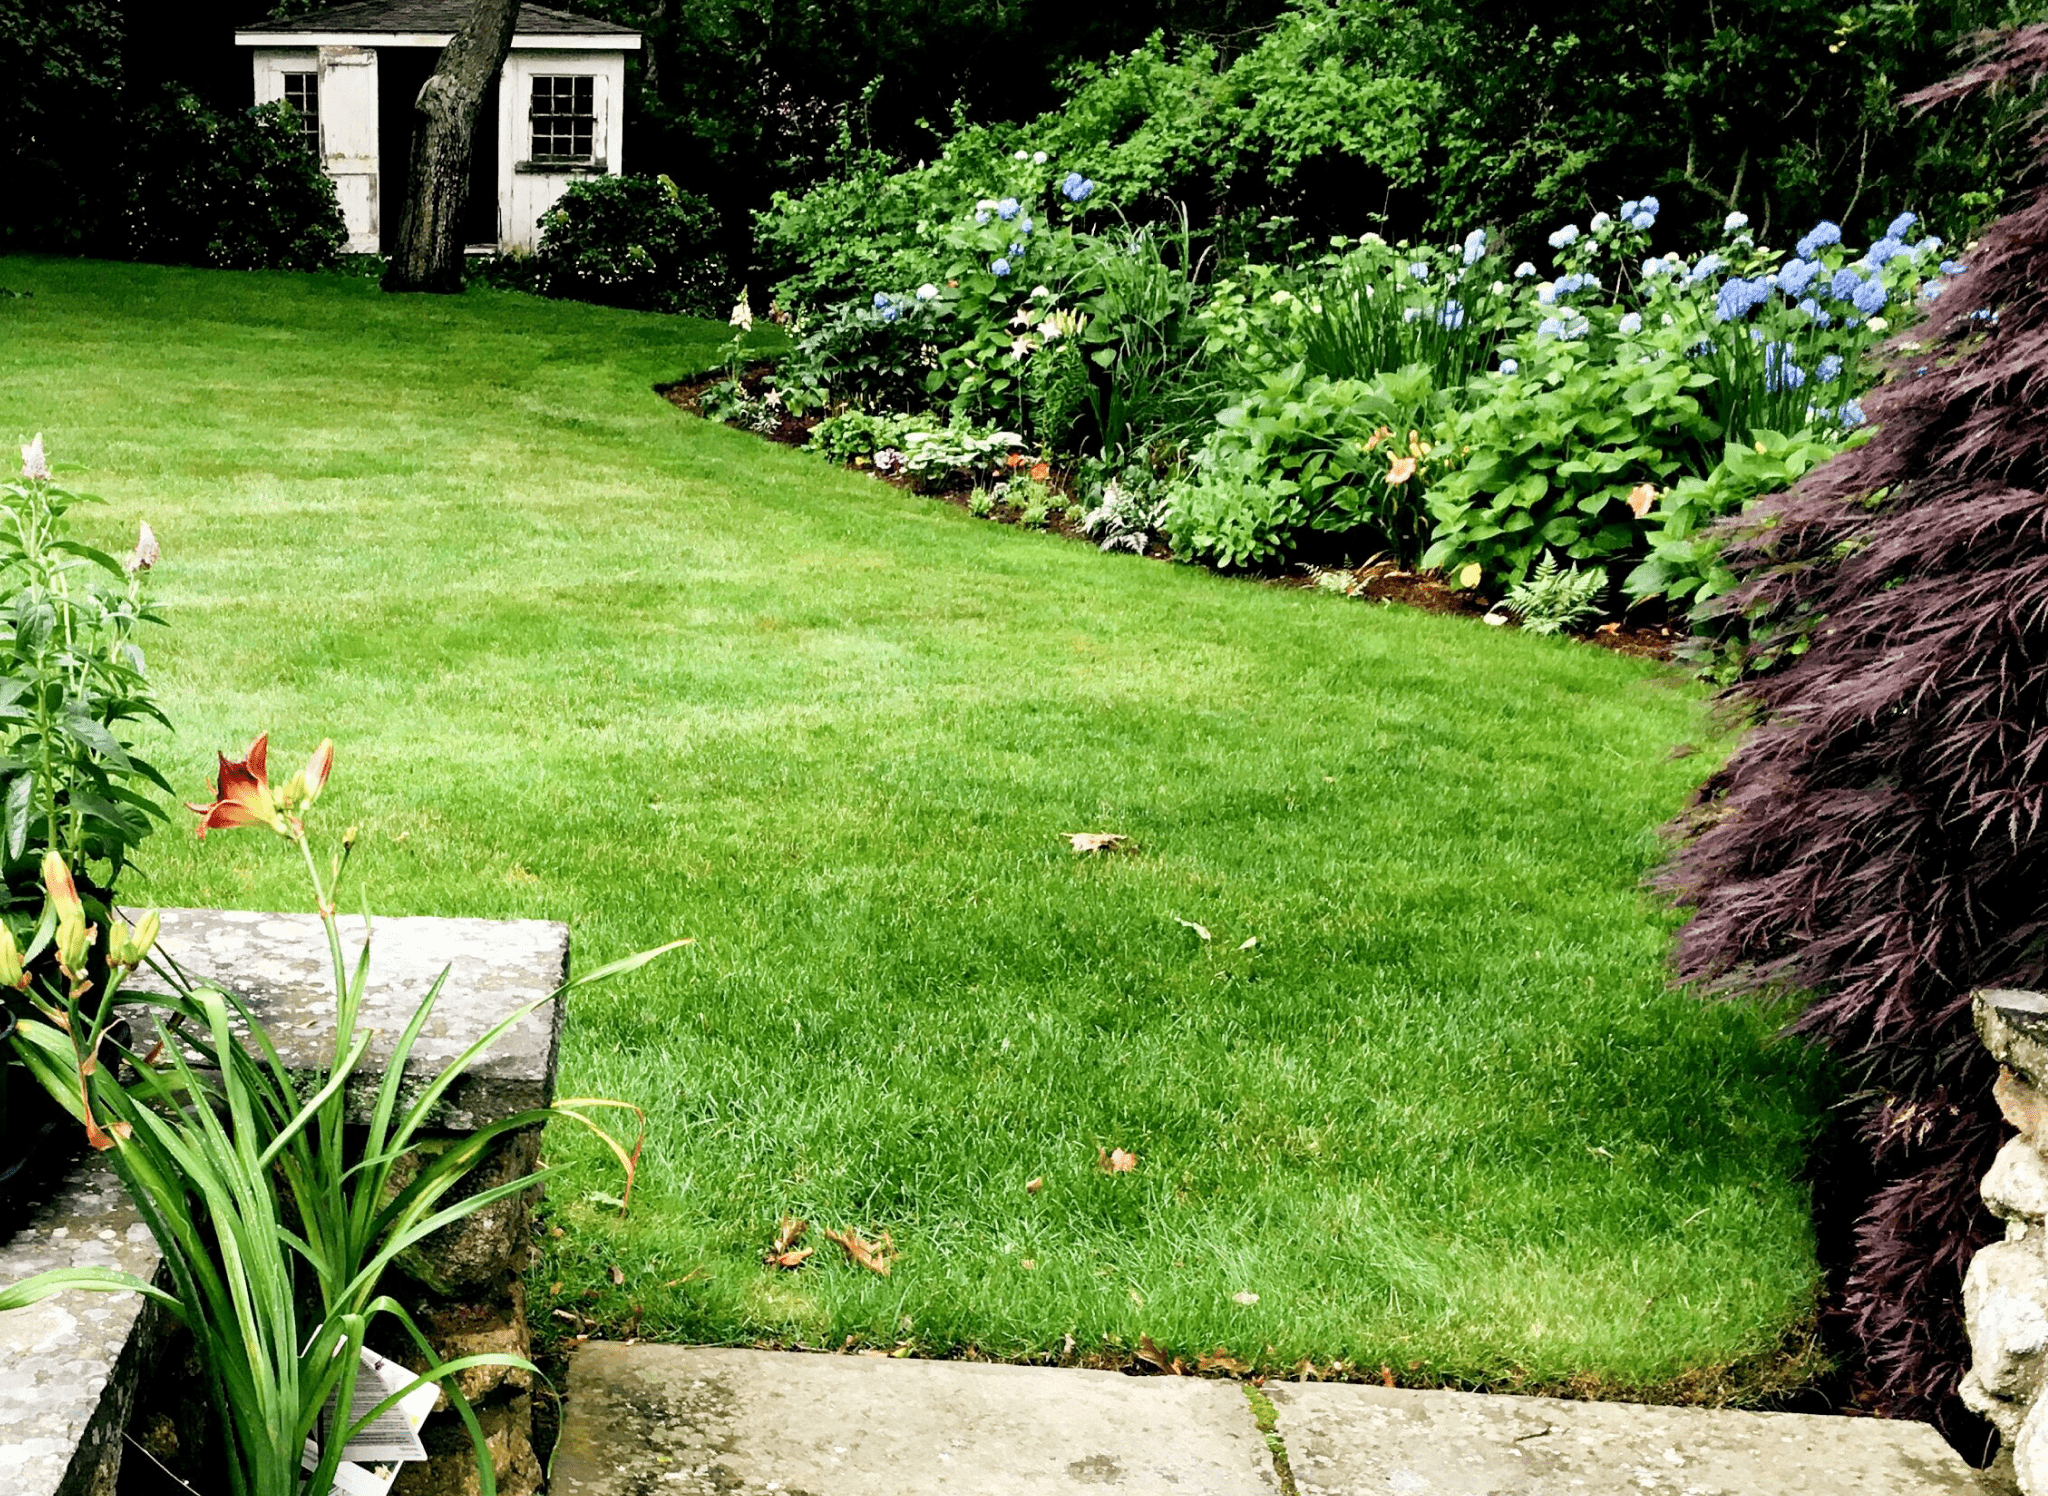 mowed lawn, bushes and flowers